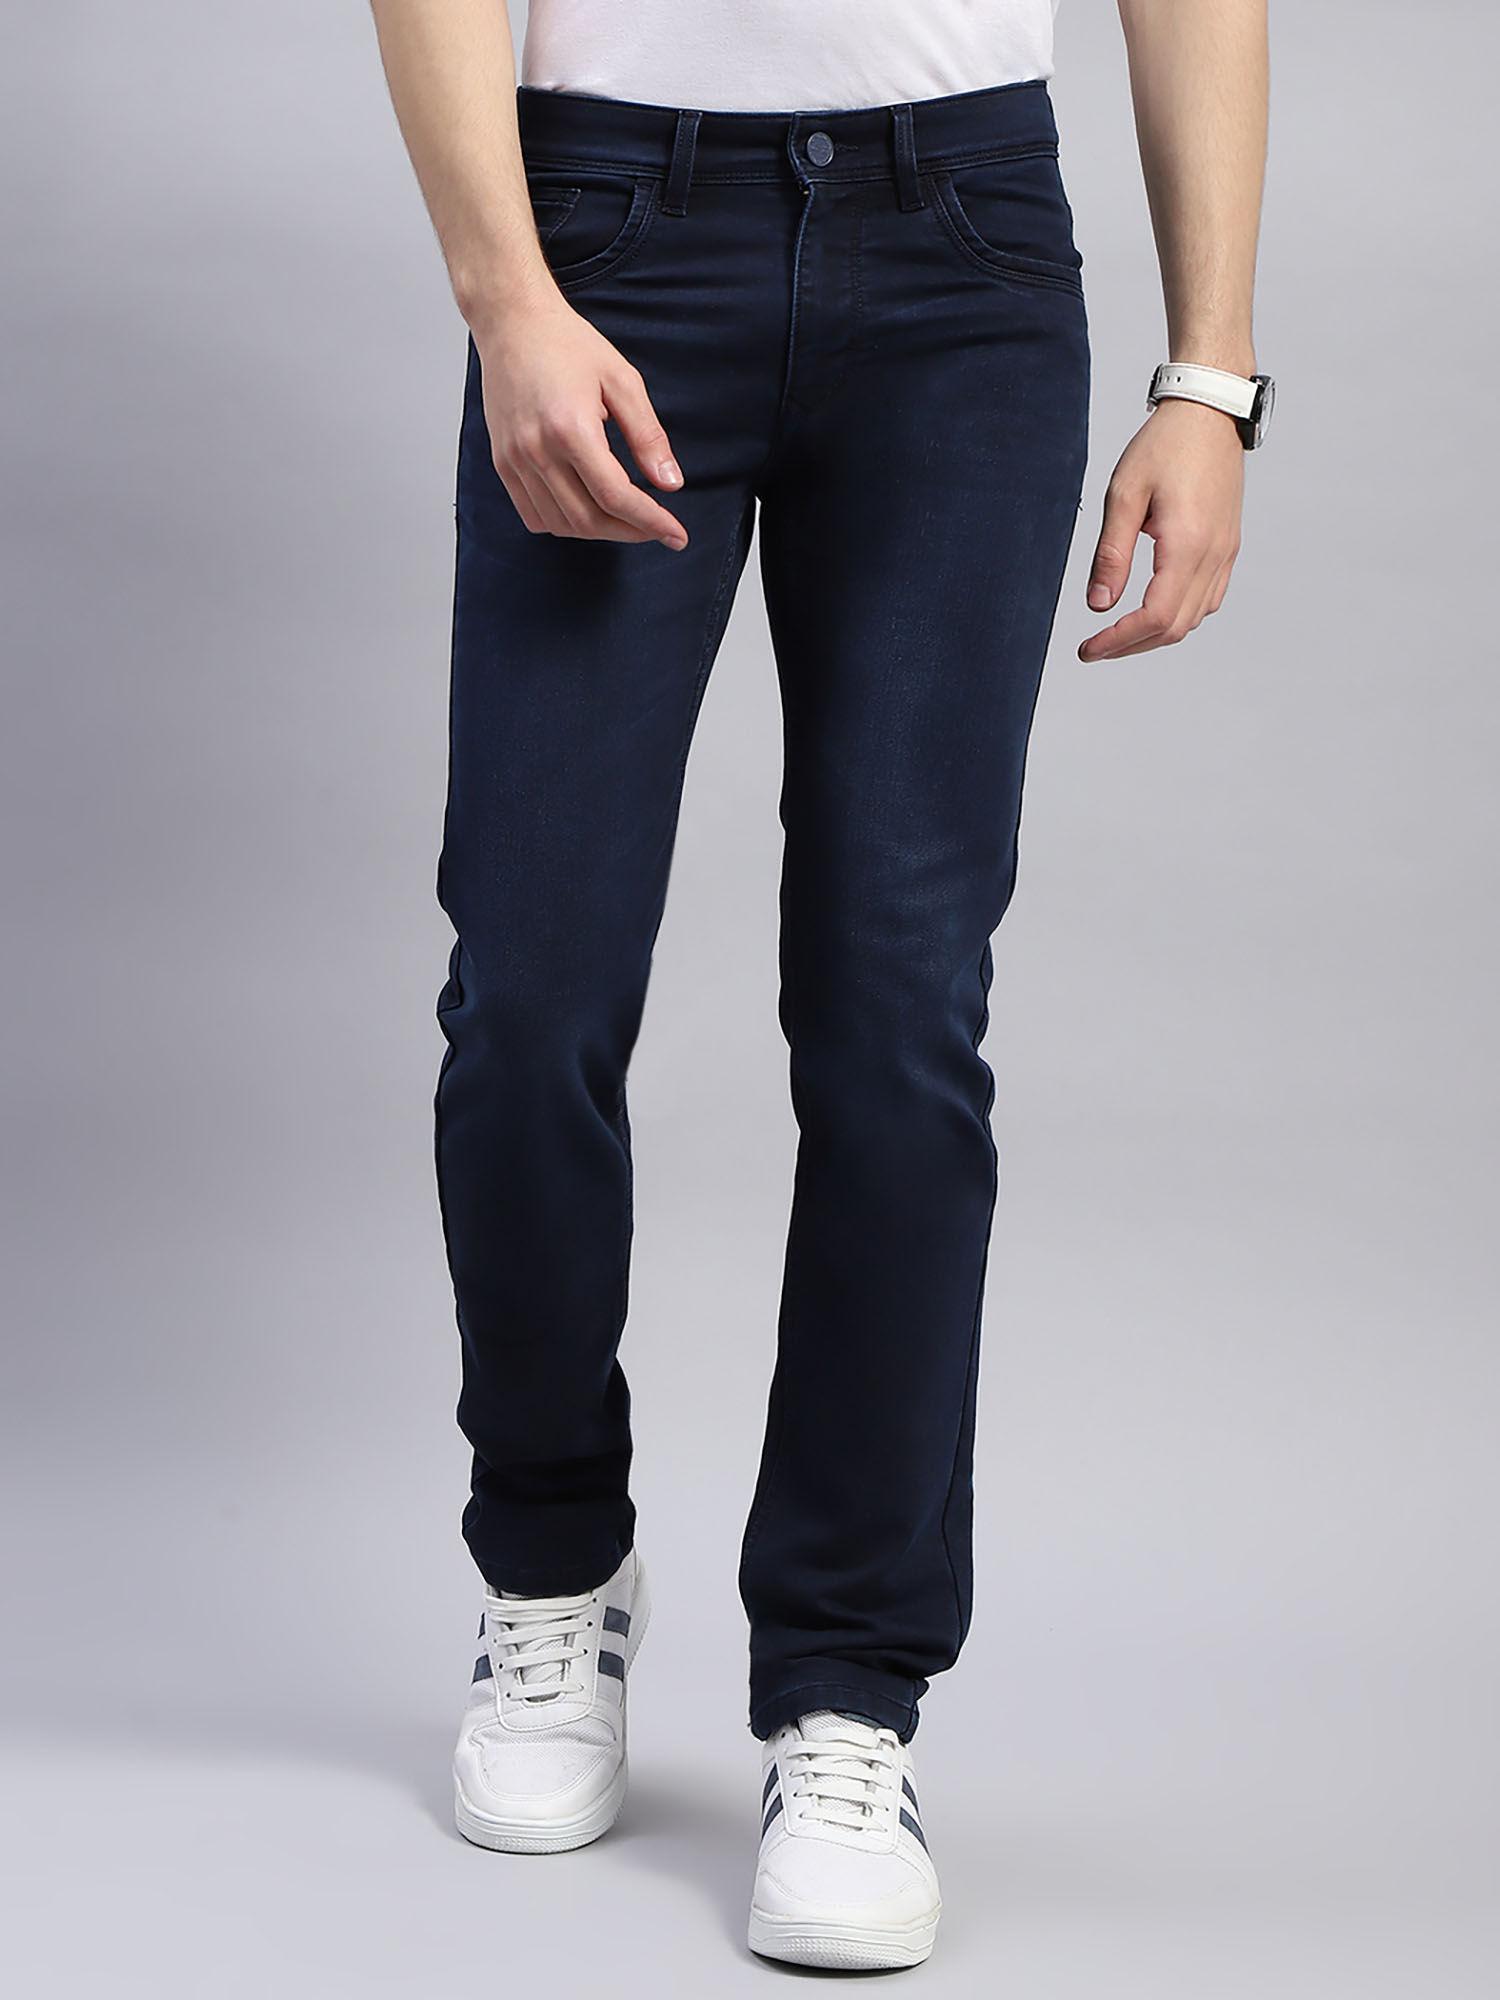 mens-solid-dark-blue-straight-fit-casual-jeans